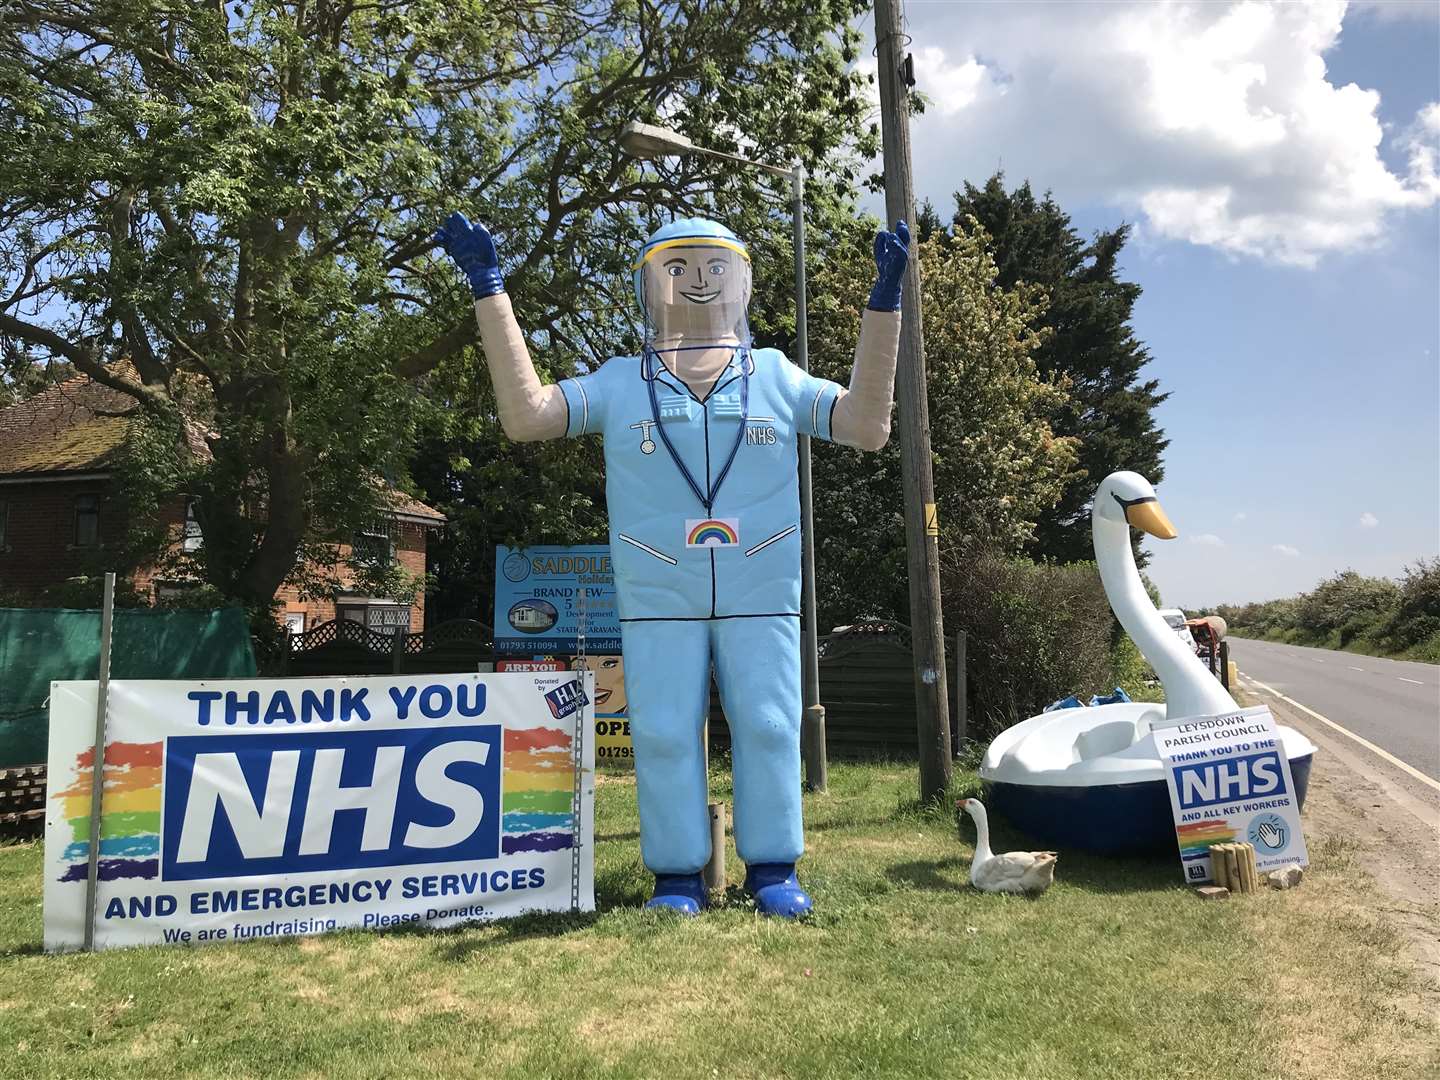 The 'Big Man' outside the garden centre in Leysdown Road, near Bay View, was painted to look like an NHS worker during the coronavirus crisis